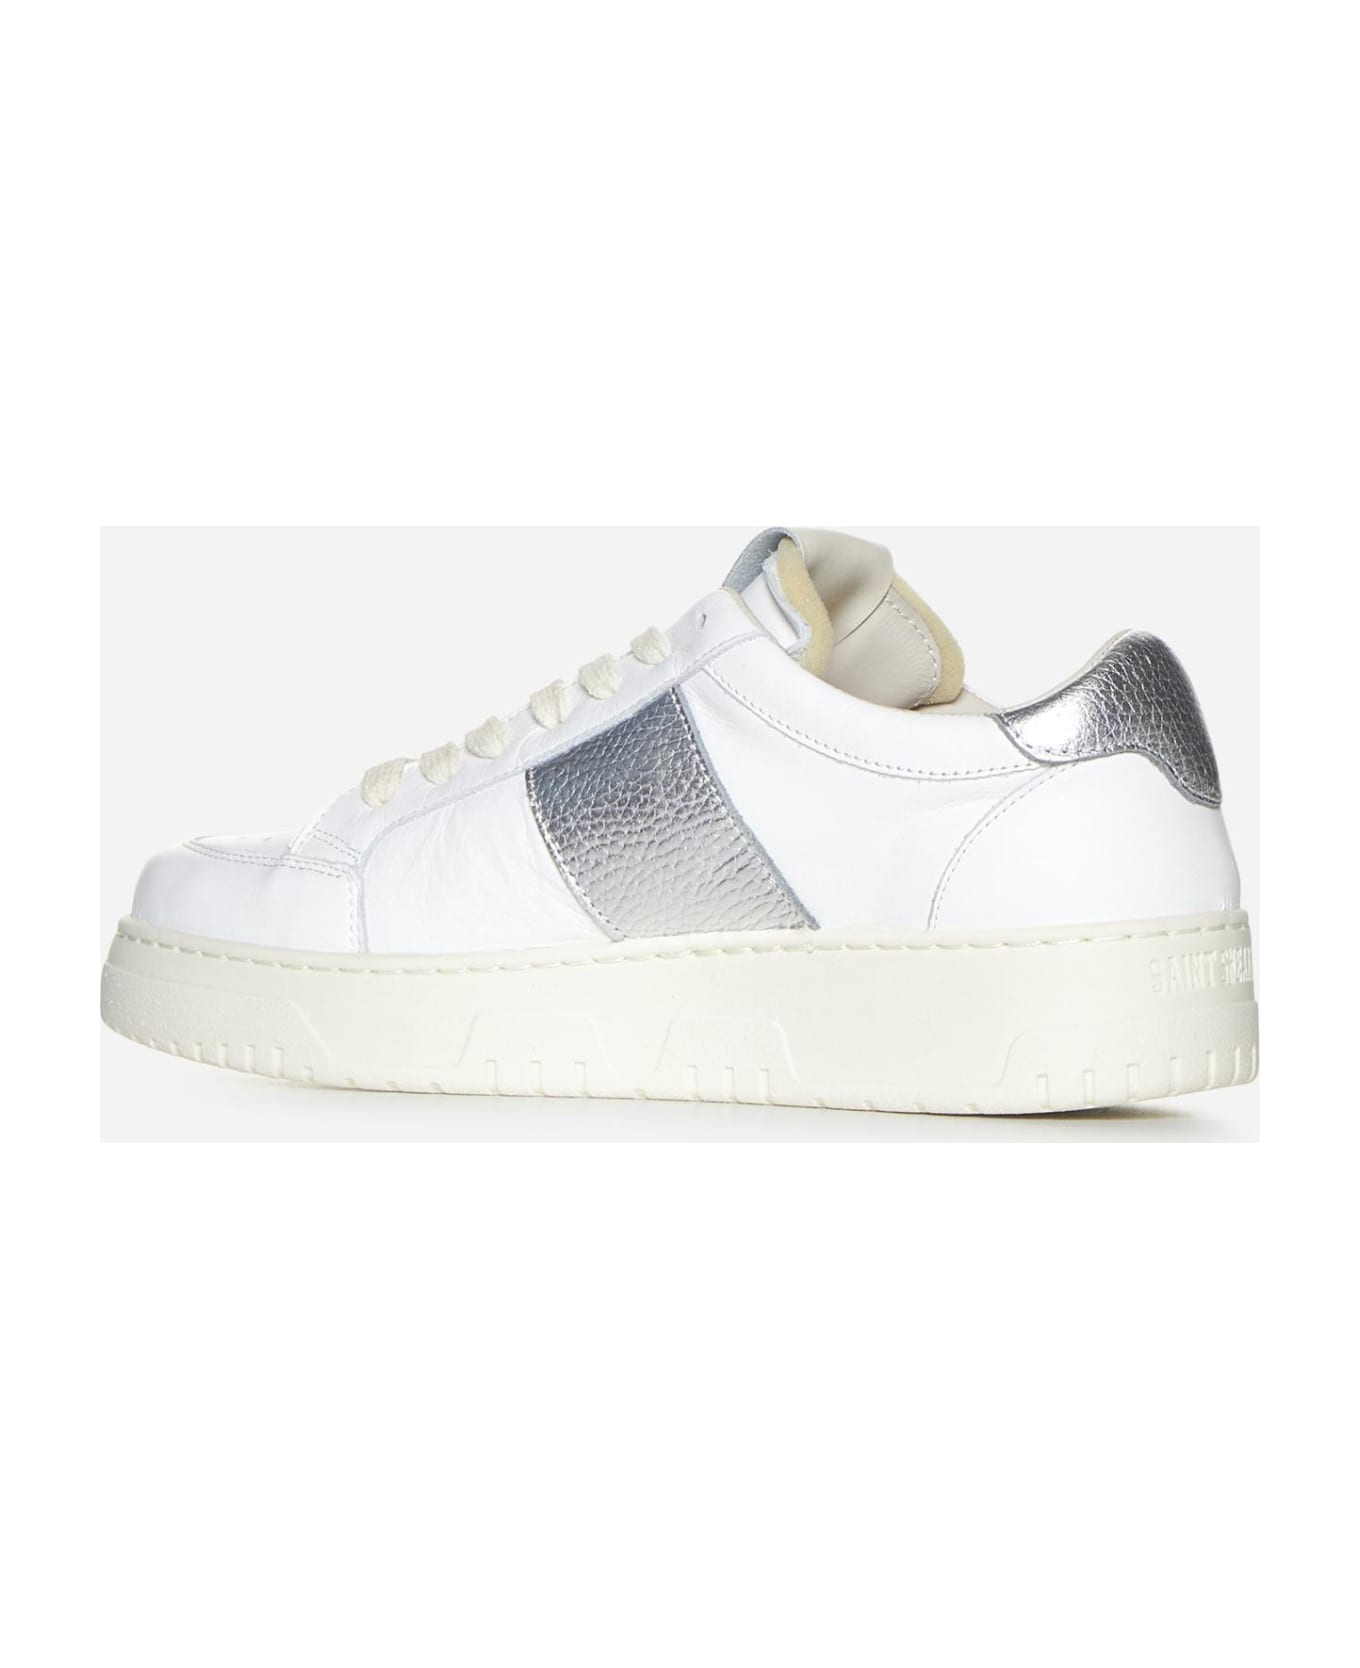 Saint Sneakers Tennis Leather Sneakers - White/silver